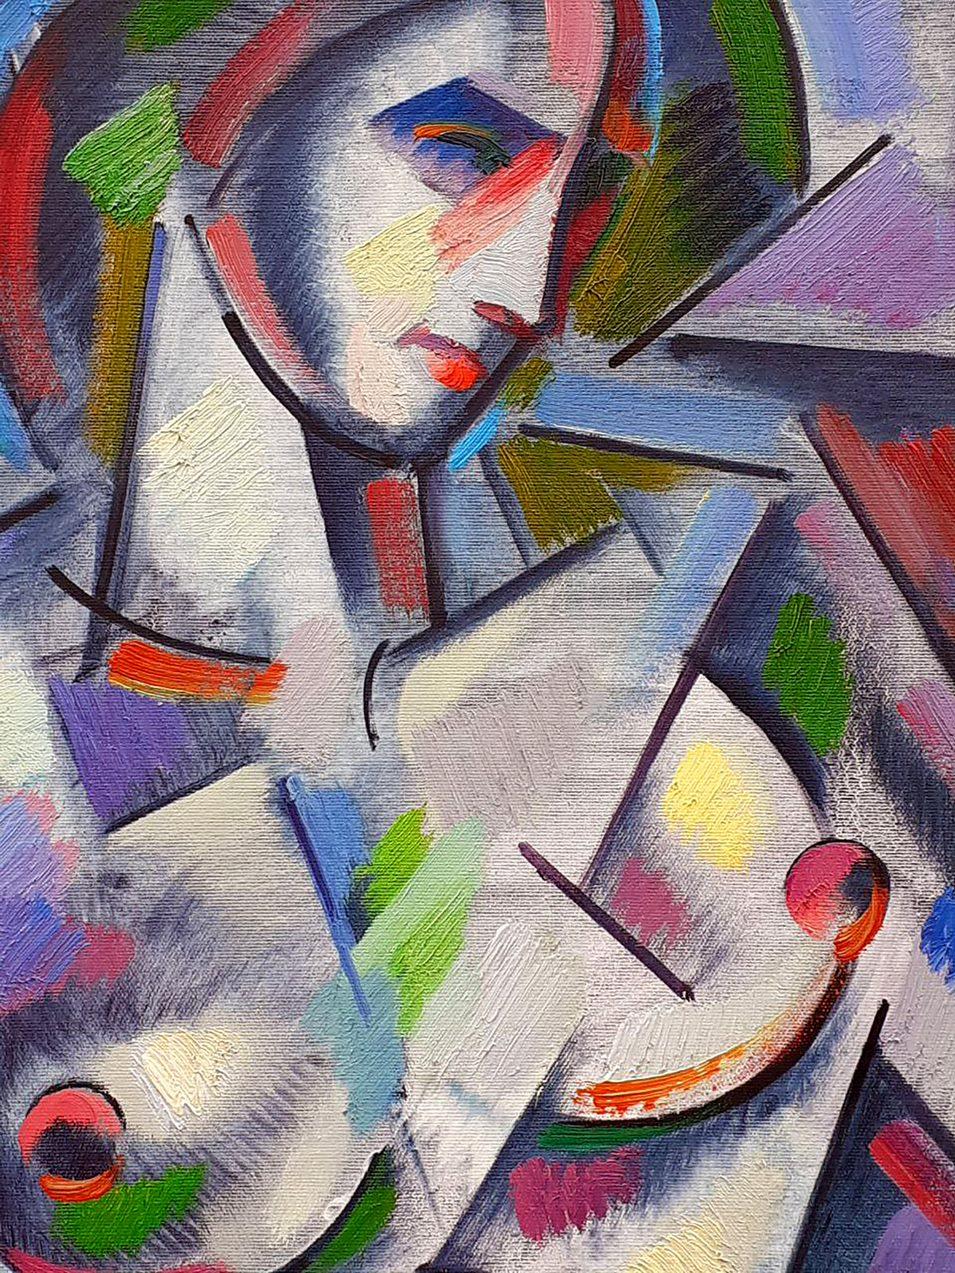 Artist: Peter Tovpev
Work: Original oil painting, handmade artwork, one of a kind 
Medium: Oil on Canvas 
Year: 2022
Style: Cubism
Title: The Model
Size: 35.5